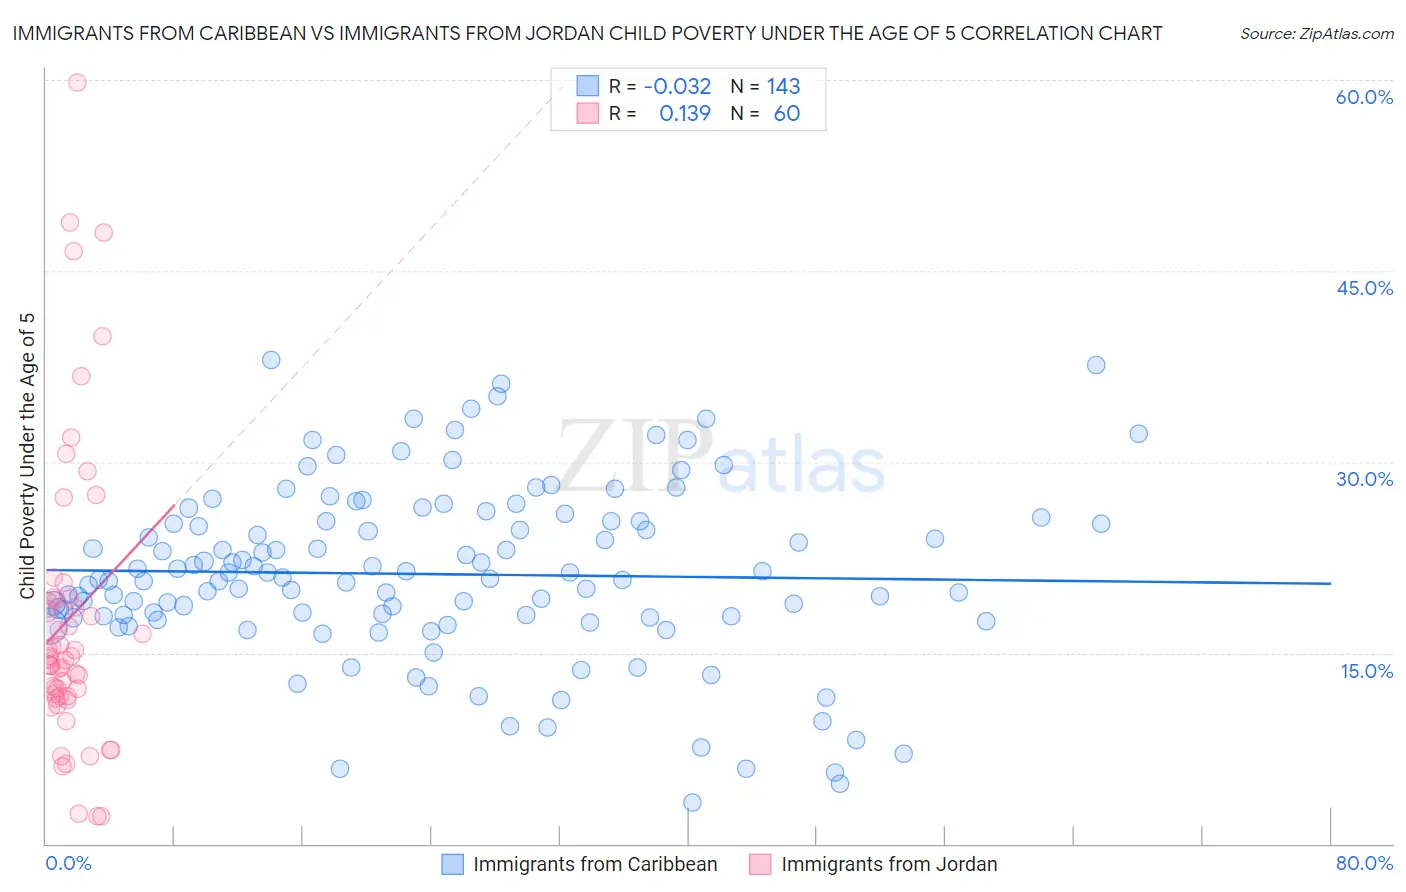 Immigrants from Caribbean vs Immigrants from Jordan Child Poverty Under the Age of 5